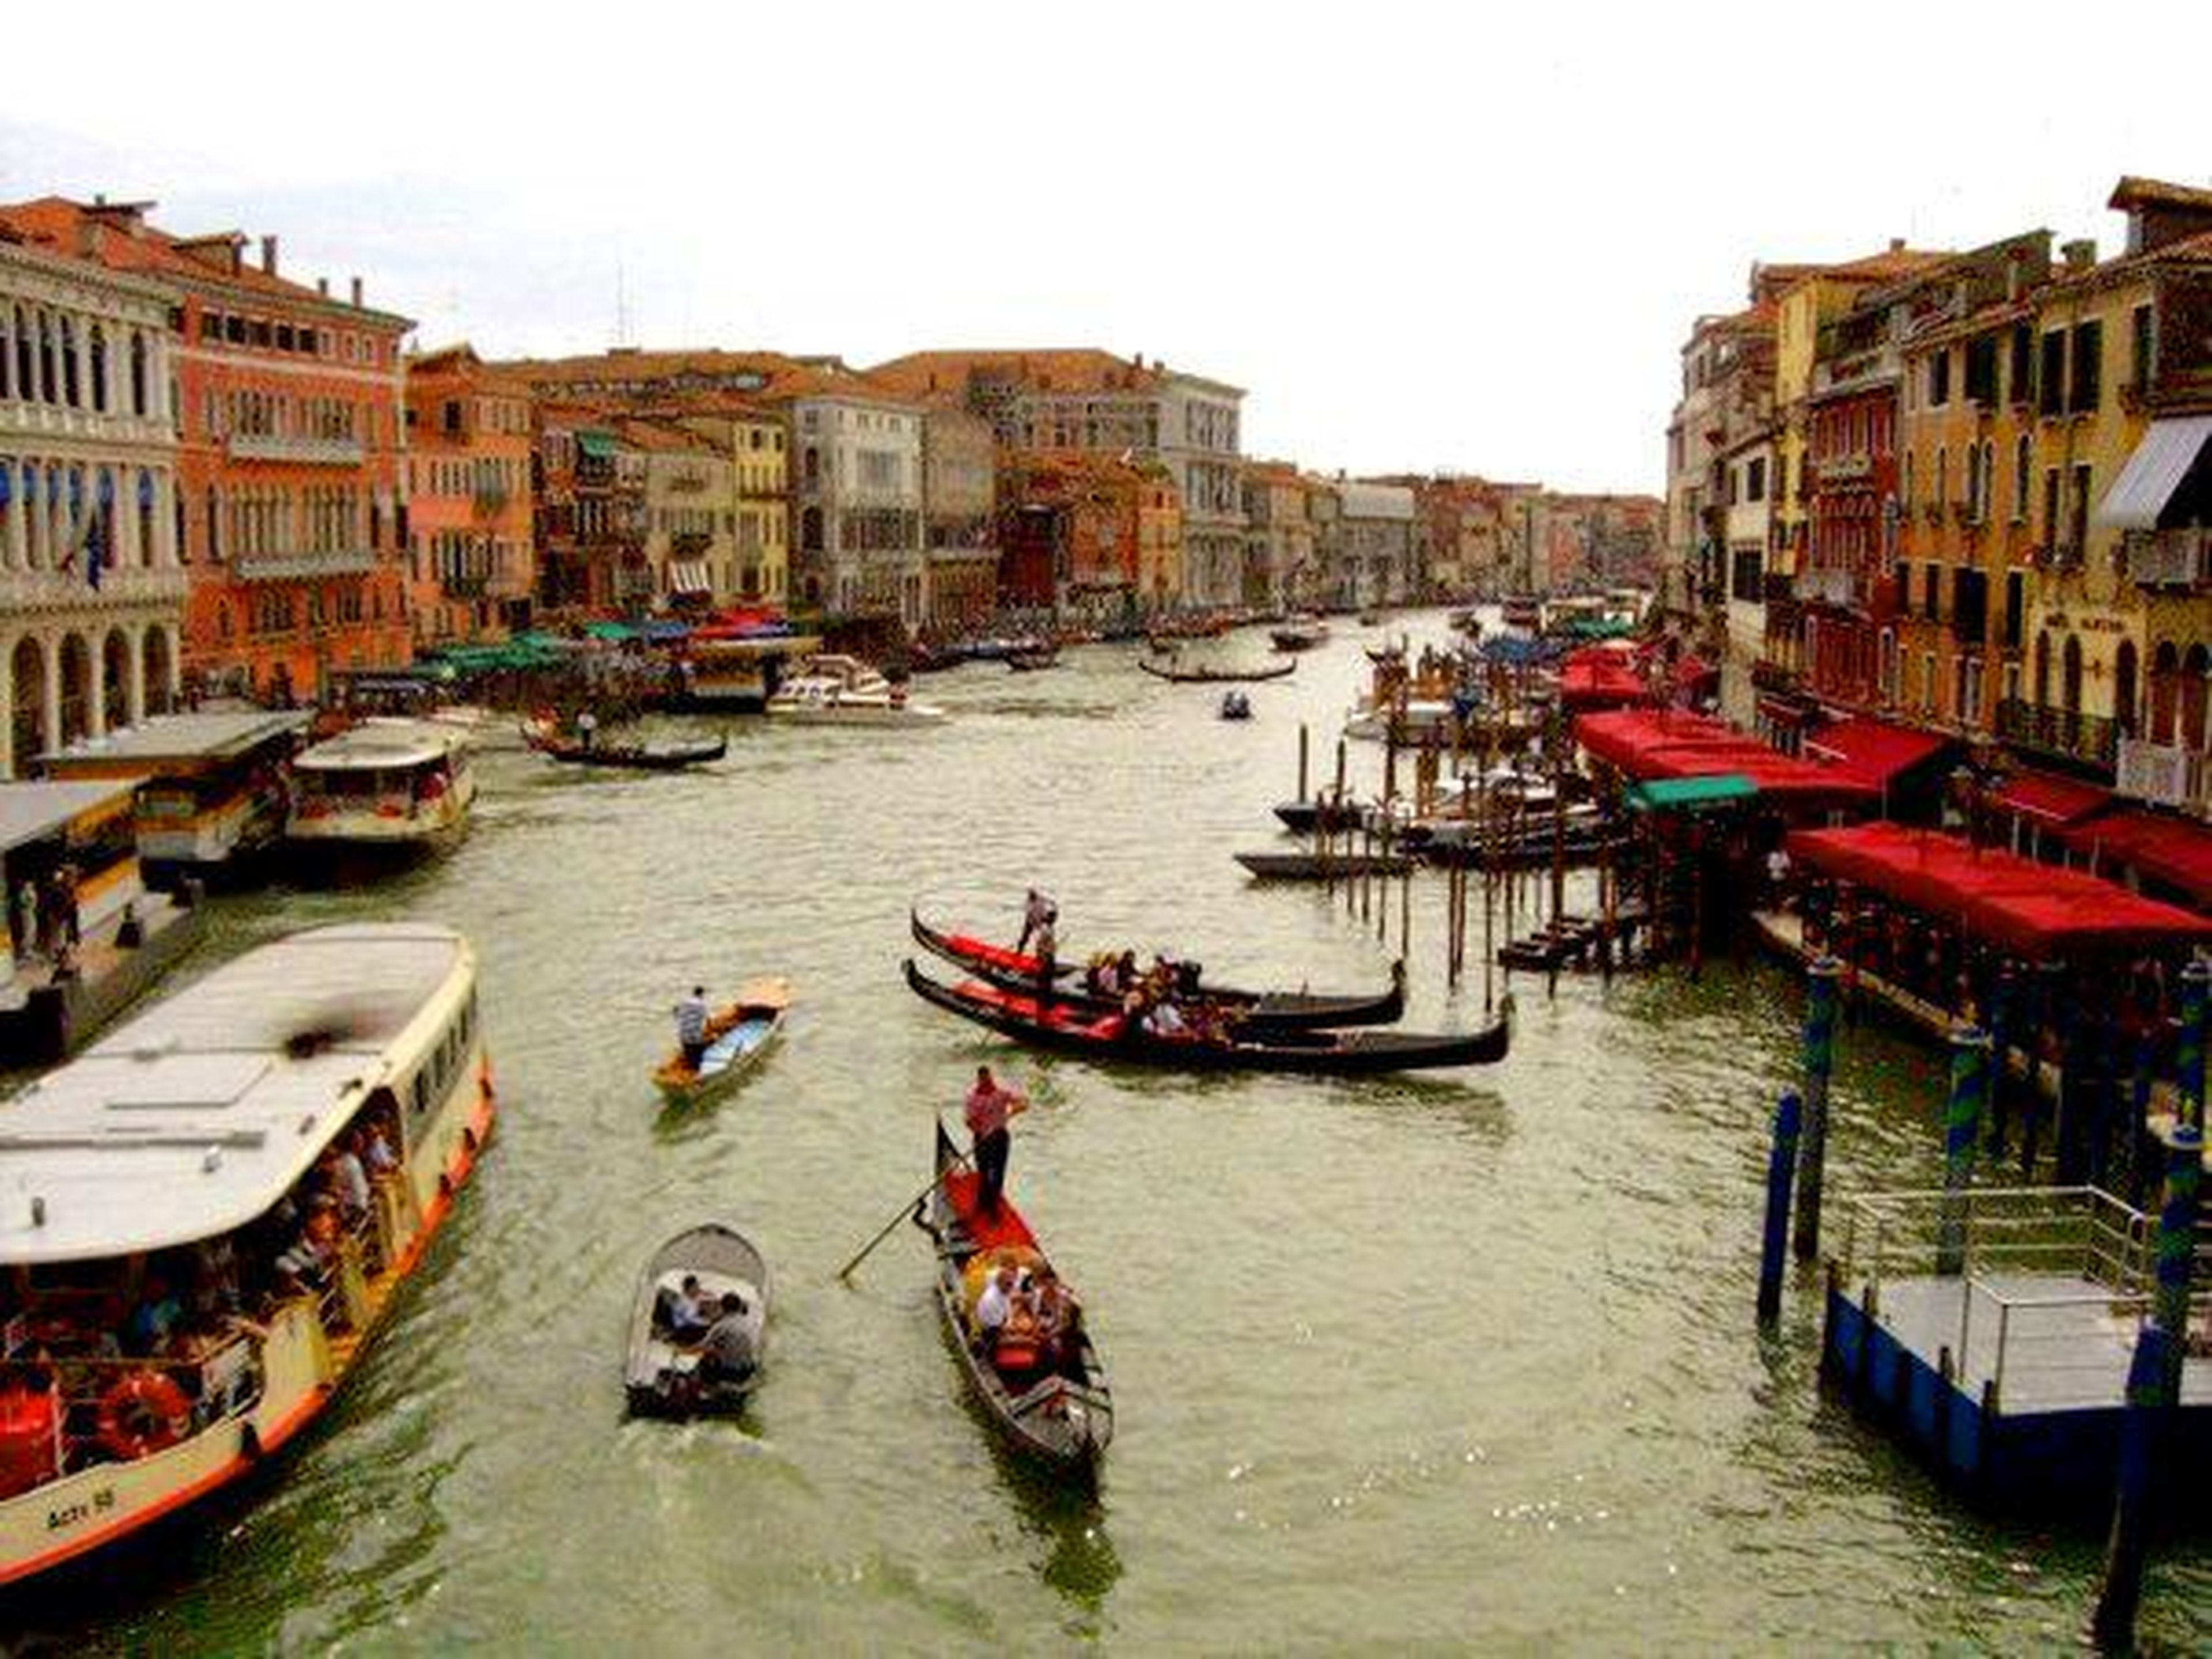 Venice, Italy serves as the "front line" of the battle against over-tourism, as the waterways have become more packed than ever before.